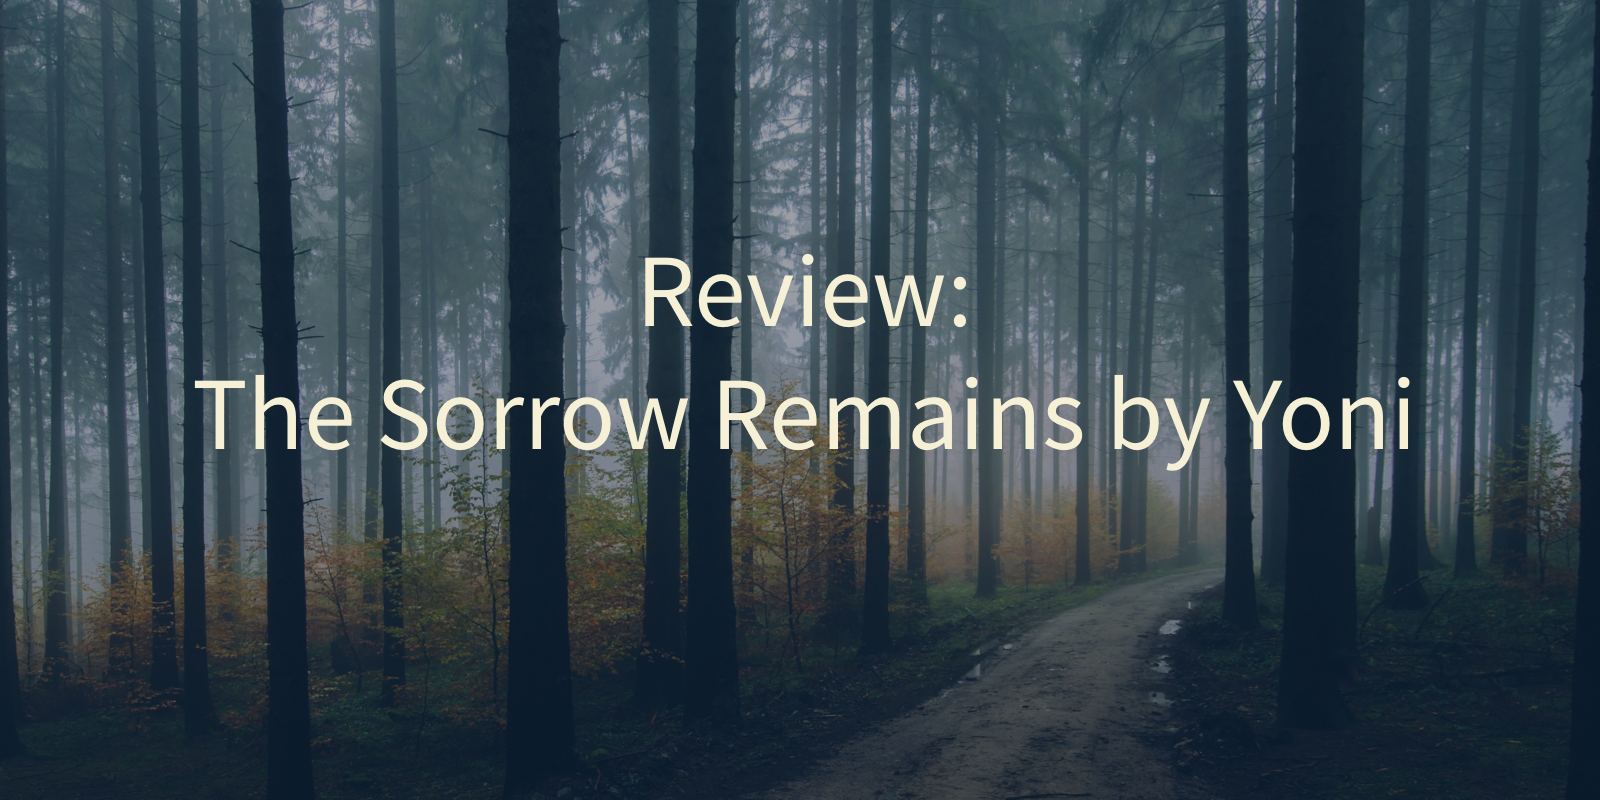 Review: The Sorrow Remains by Yoni